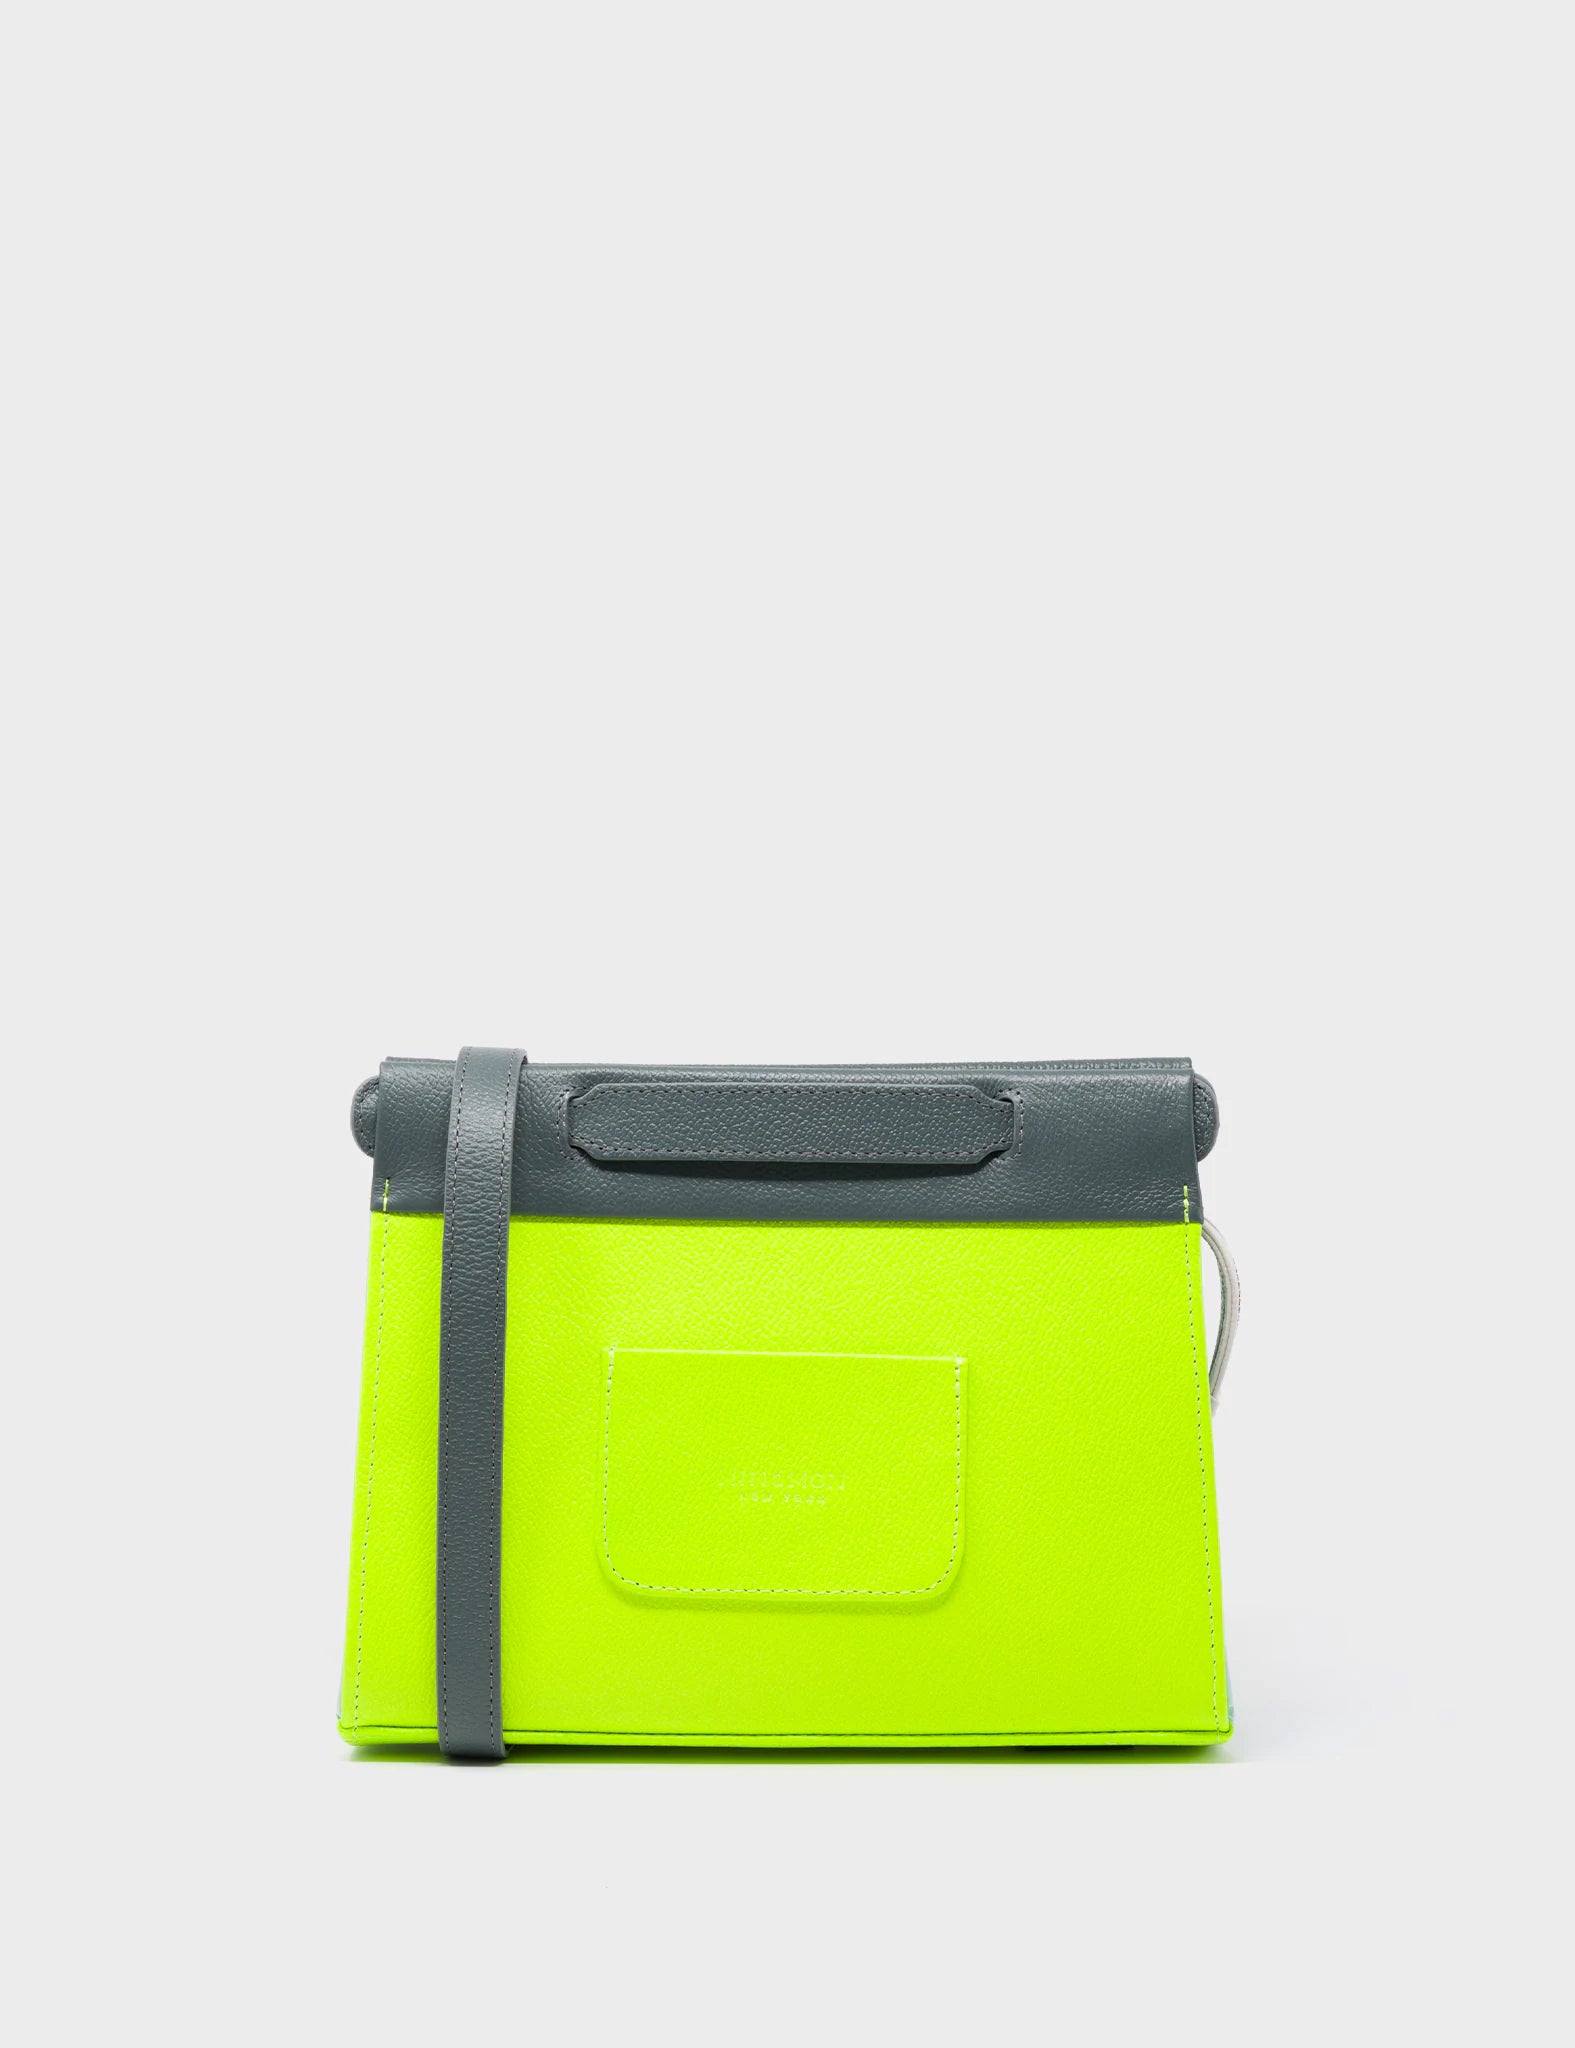 Vali Crossbody Small Neon Yellow Leather Bag - All Over Eyes Embroidery - Back View